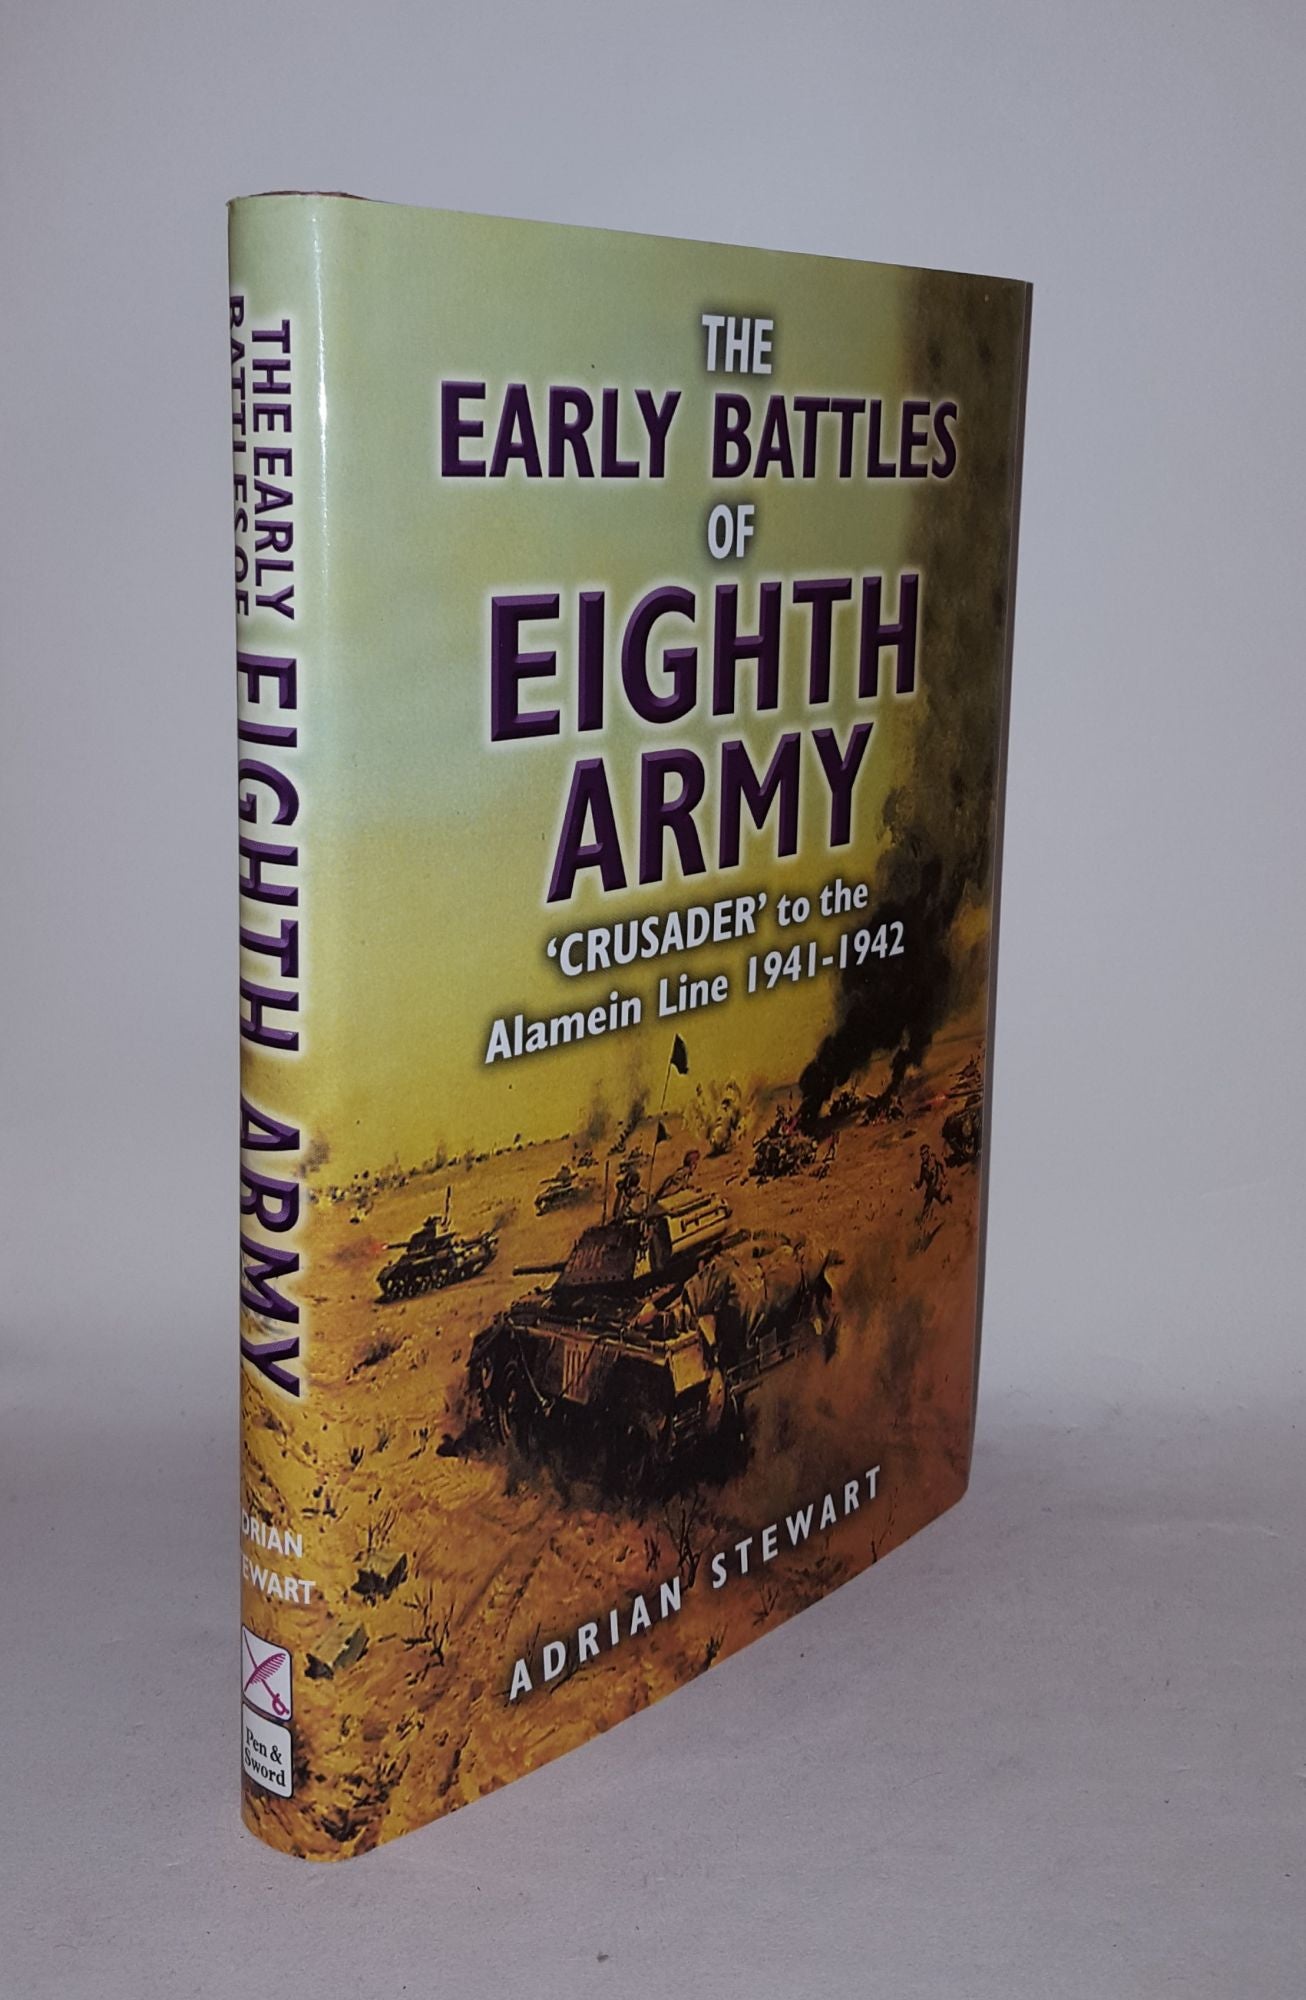 STEWART Adrian - The Early Battles of the Eighth Army Crusader to the Alamein Line 1941 - 1942